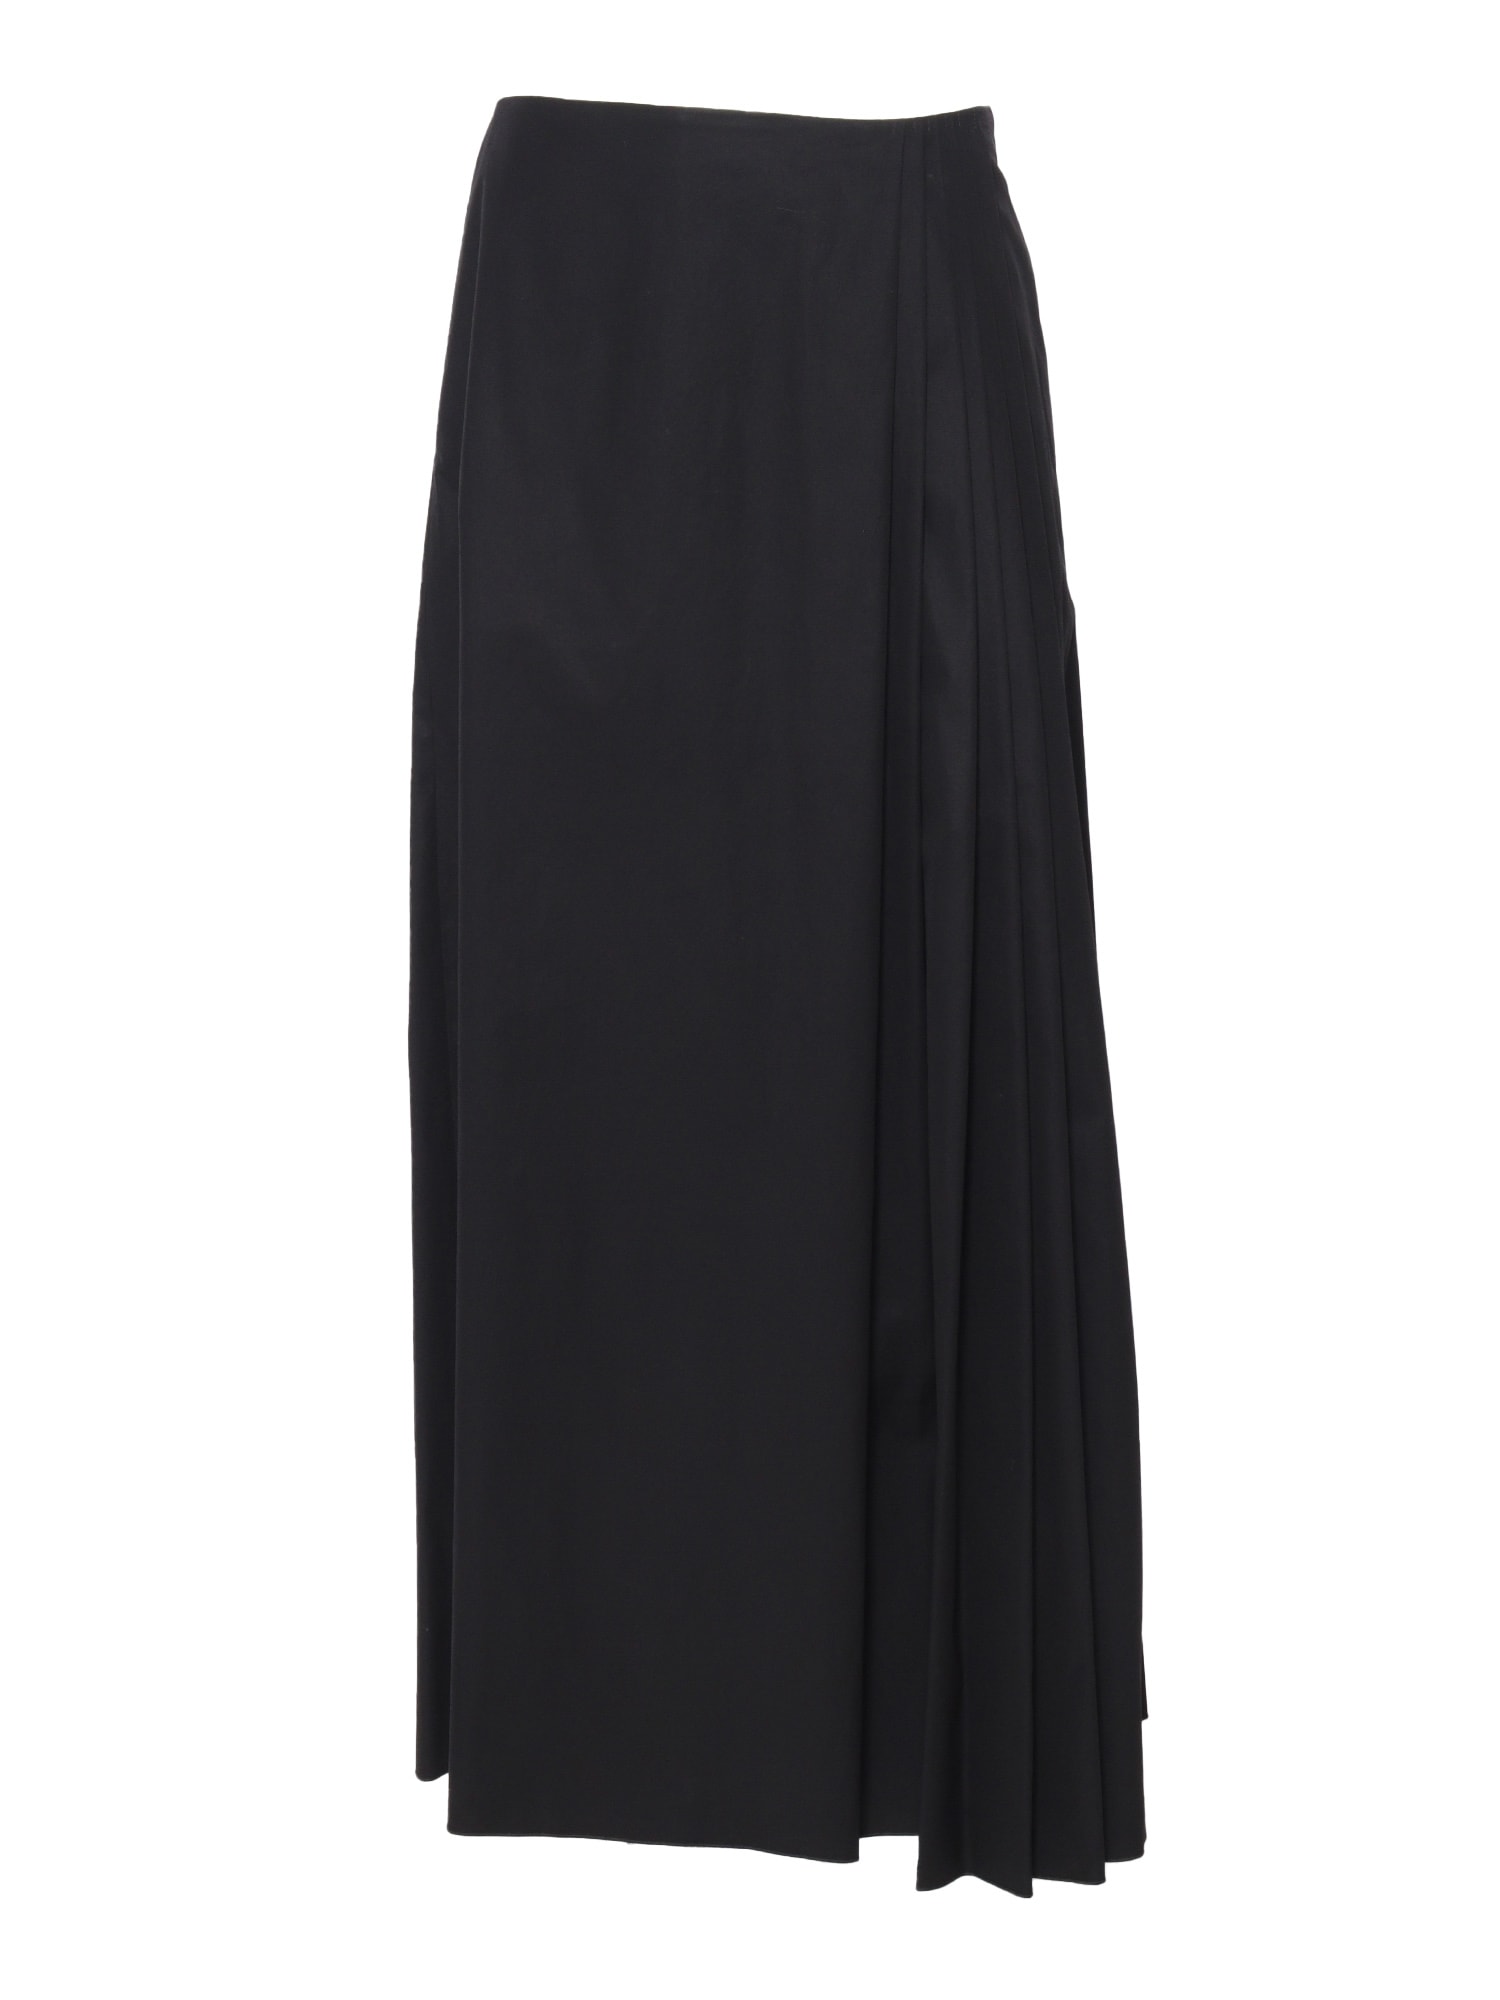 Black Skirt With Pleats